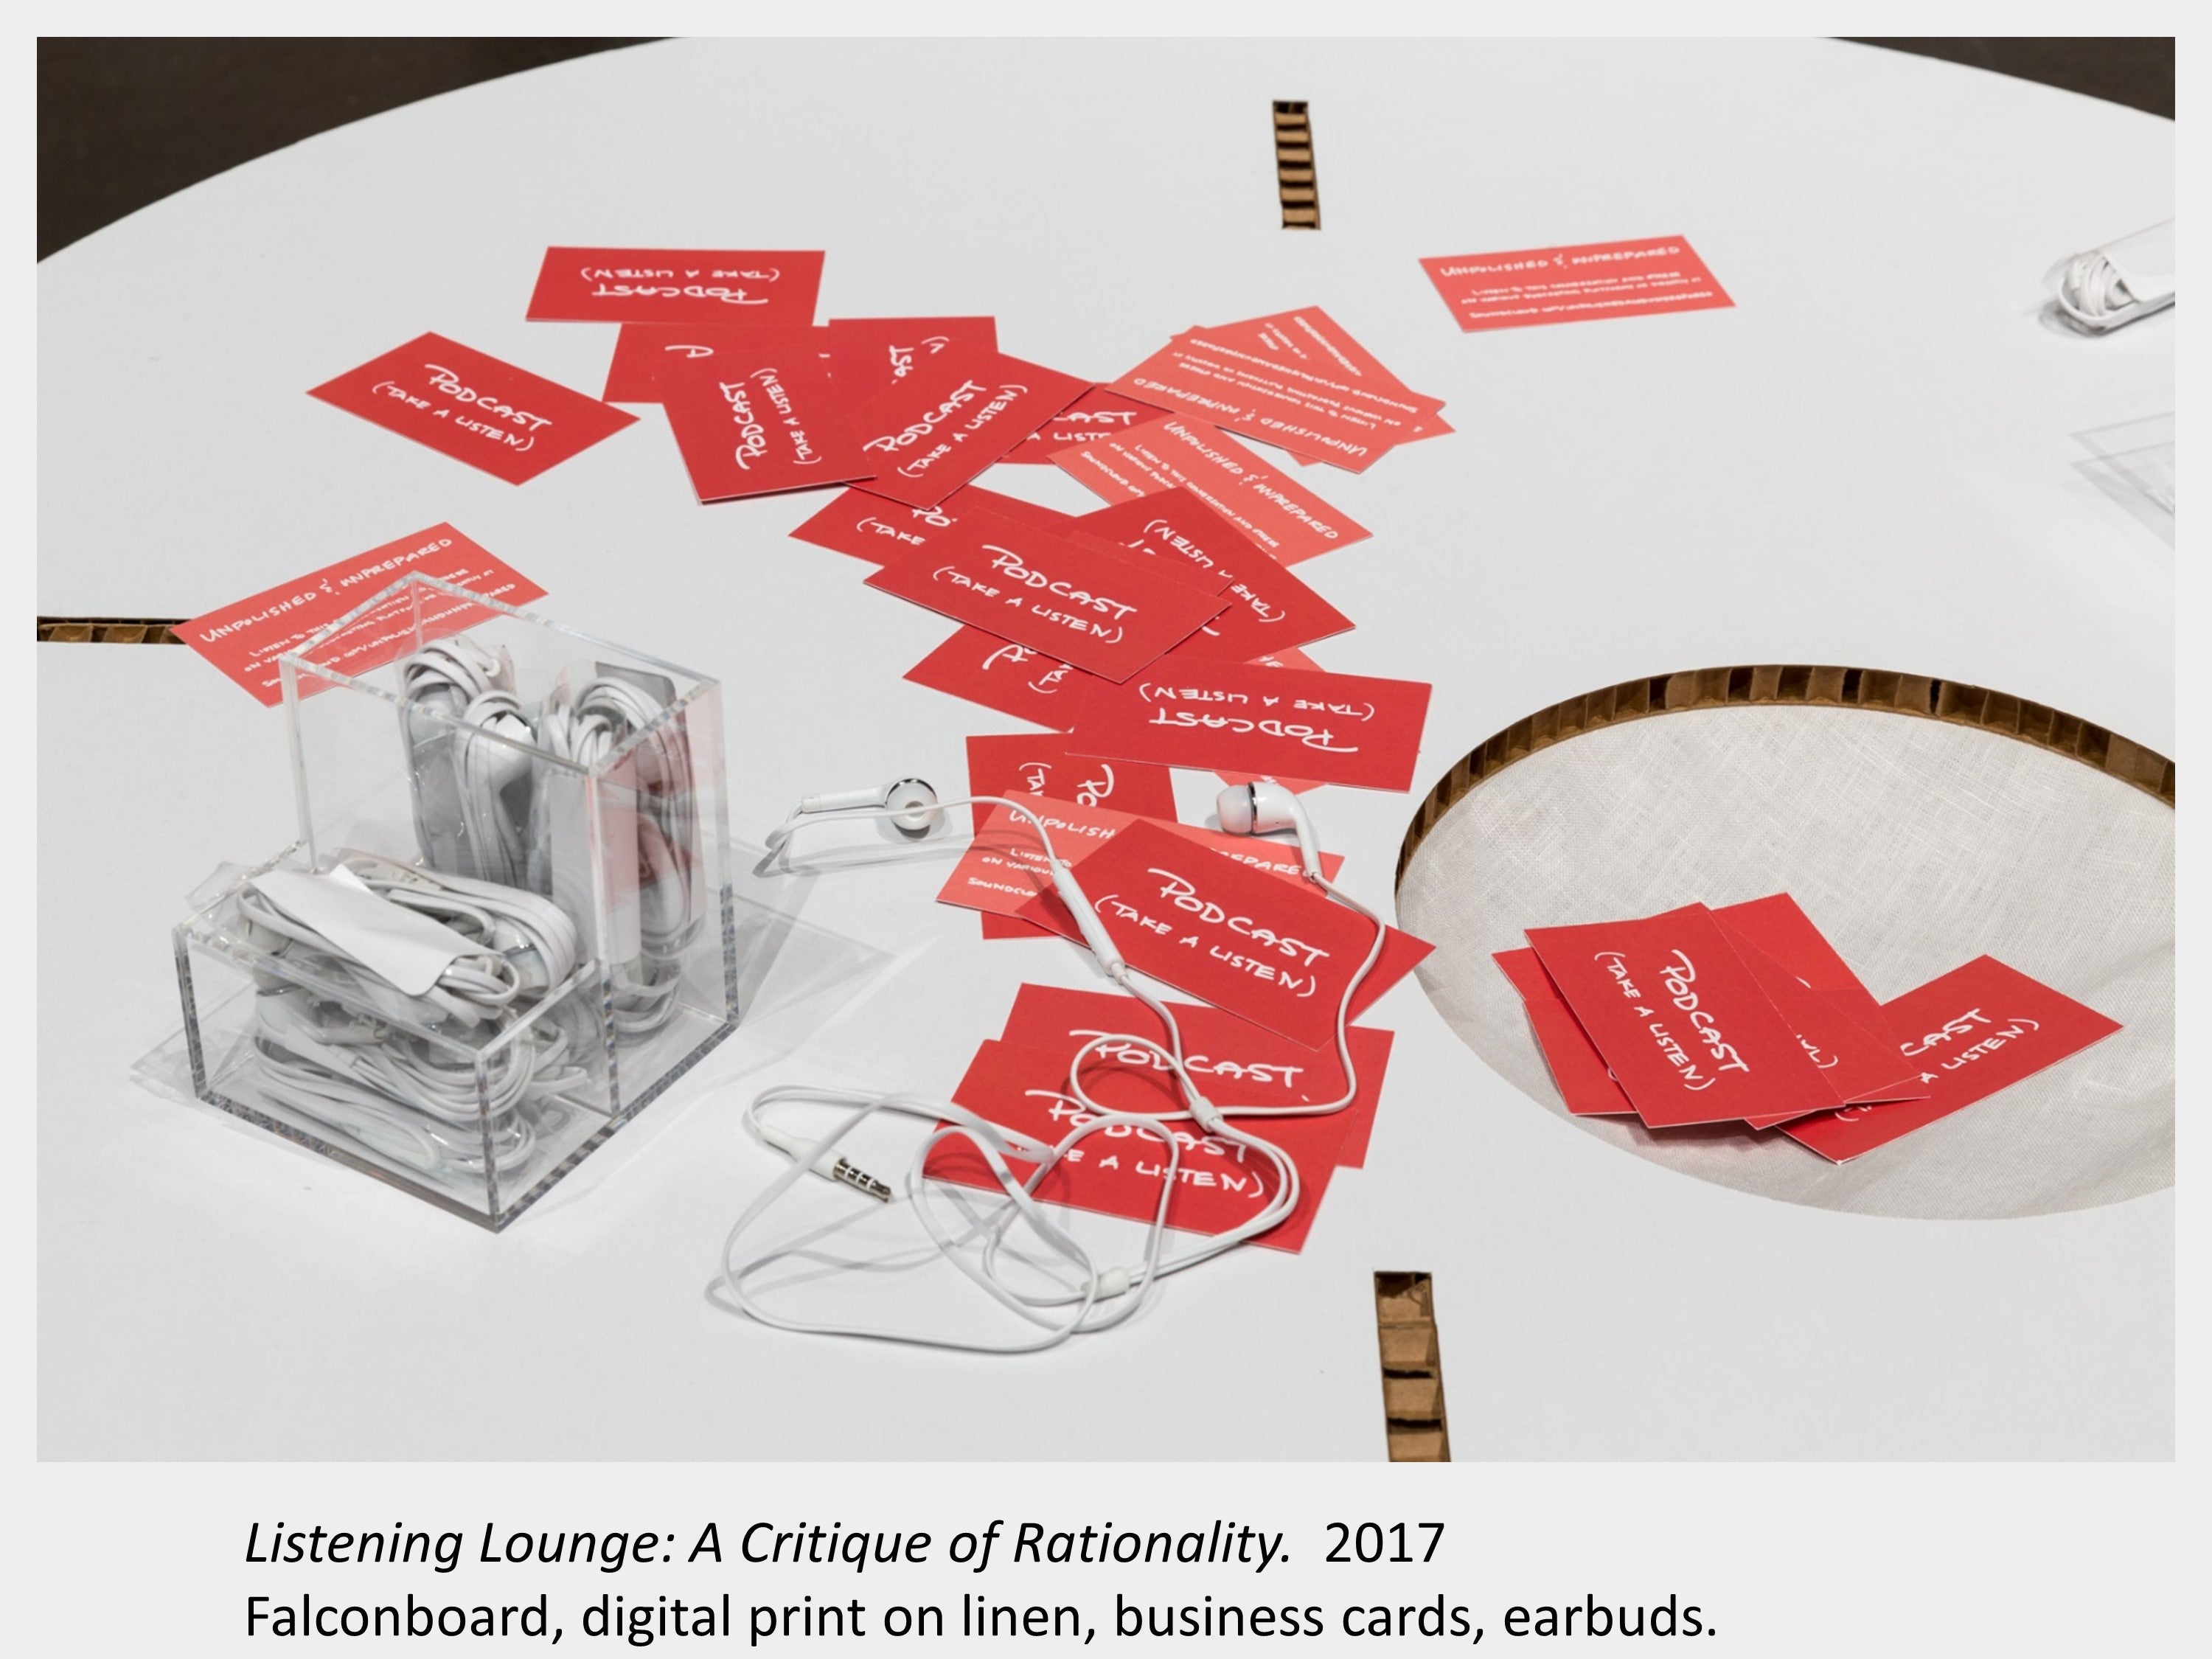 Artwork by Denise St Marie and Timothy Walker, Listening Lounge: A Critique of Rationality, 2017, business cards, earbuds